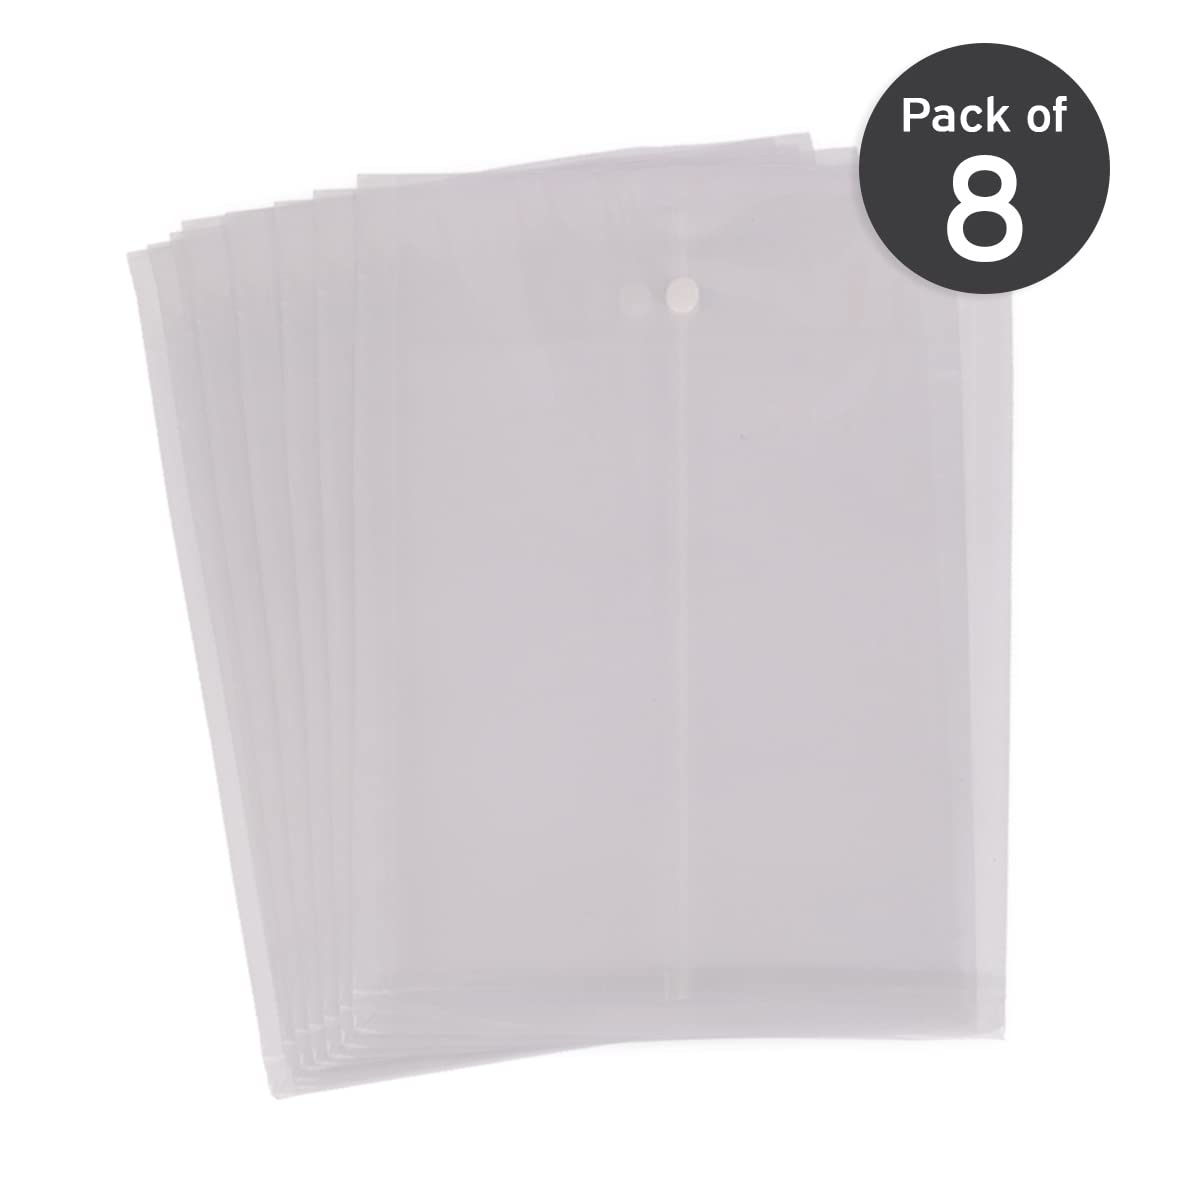 Ondesk Essentials Document Envelop Bag | Durable Plastic Document File Storage Bag with Snap Button | Folder for A4 Size Documents | File Folder Organizer with Handle Expandable | White, Pack of 8